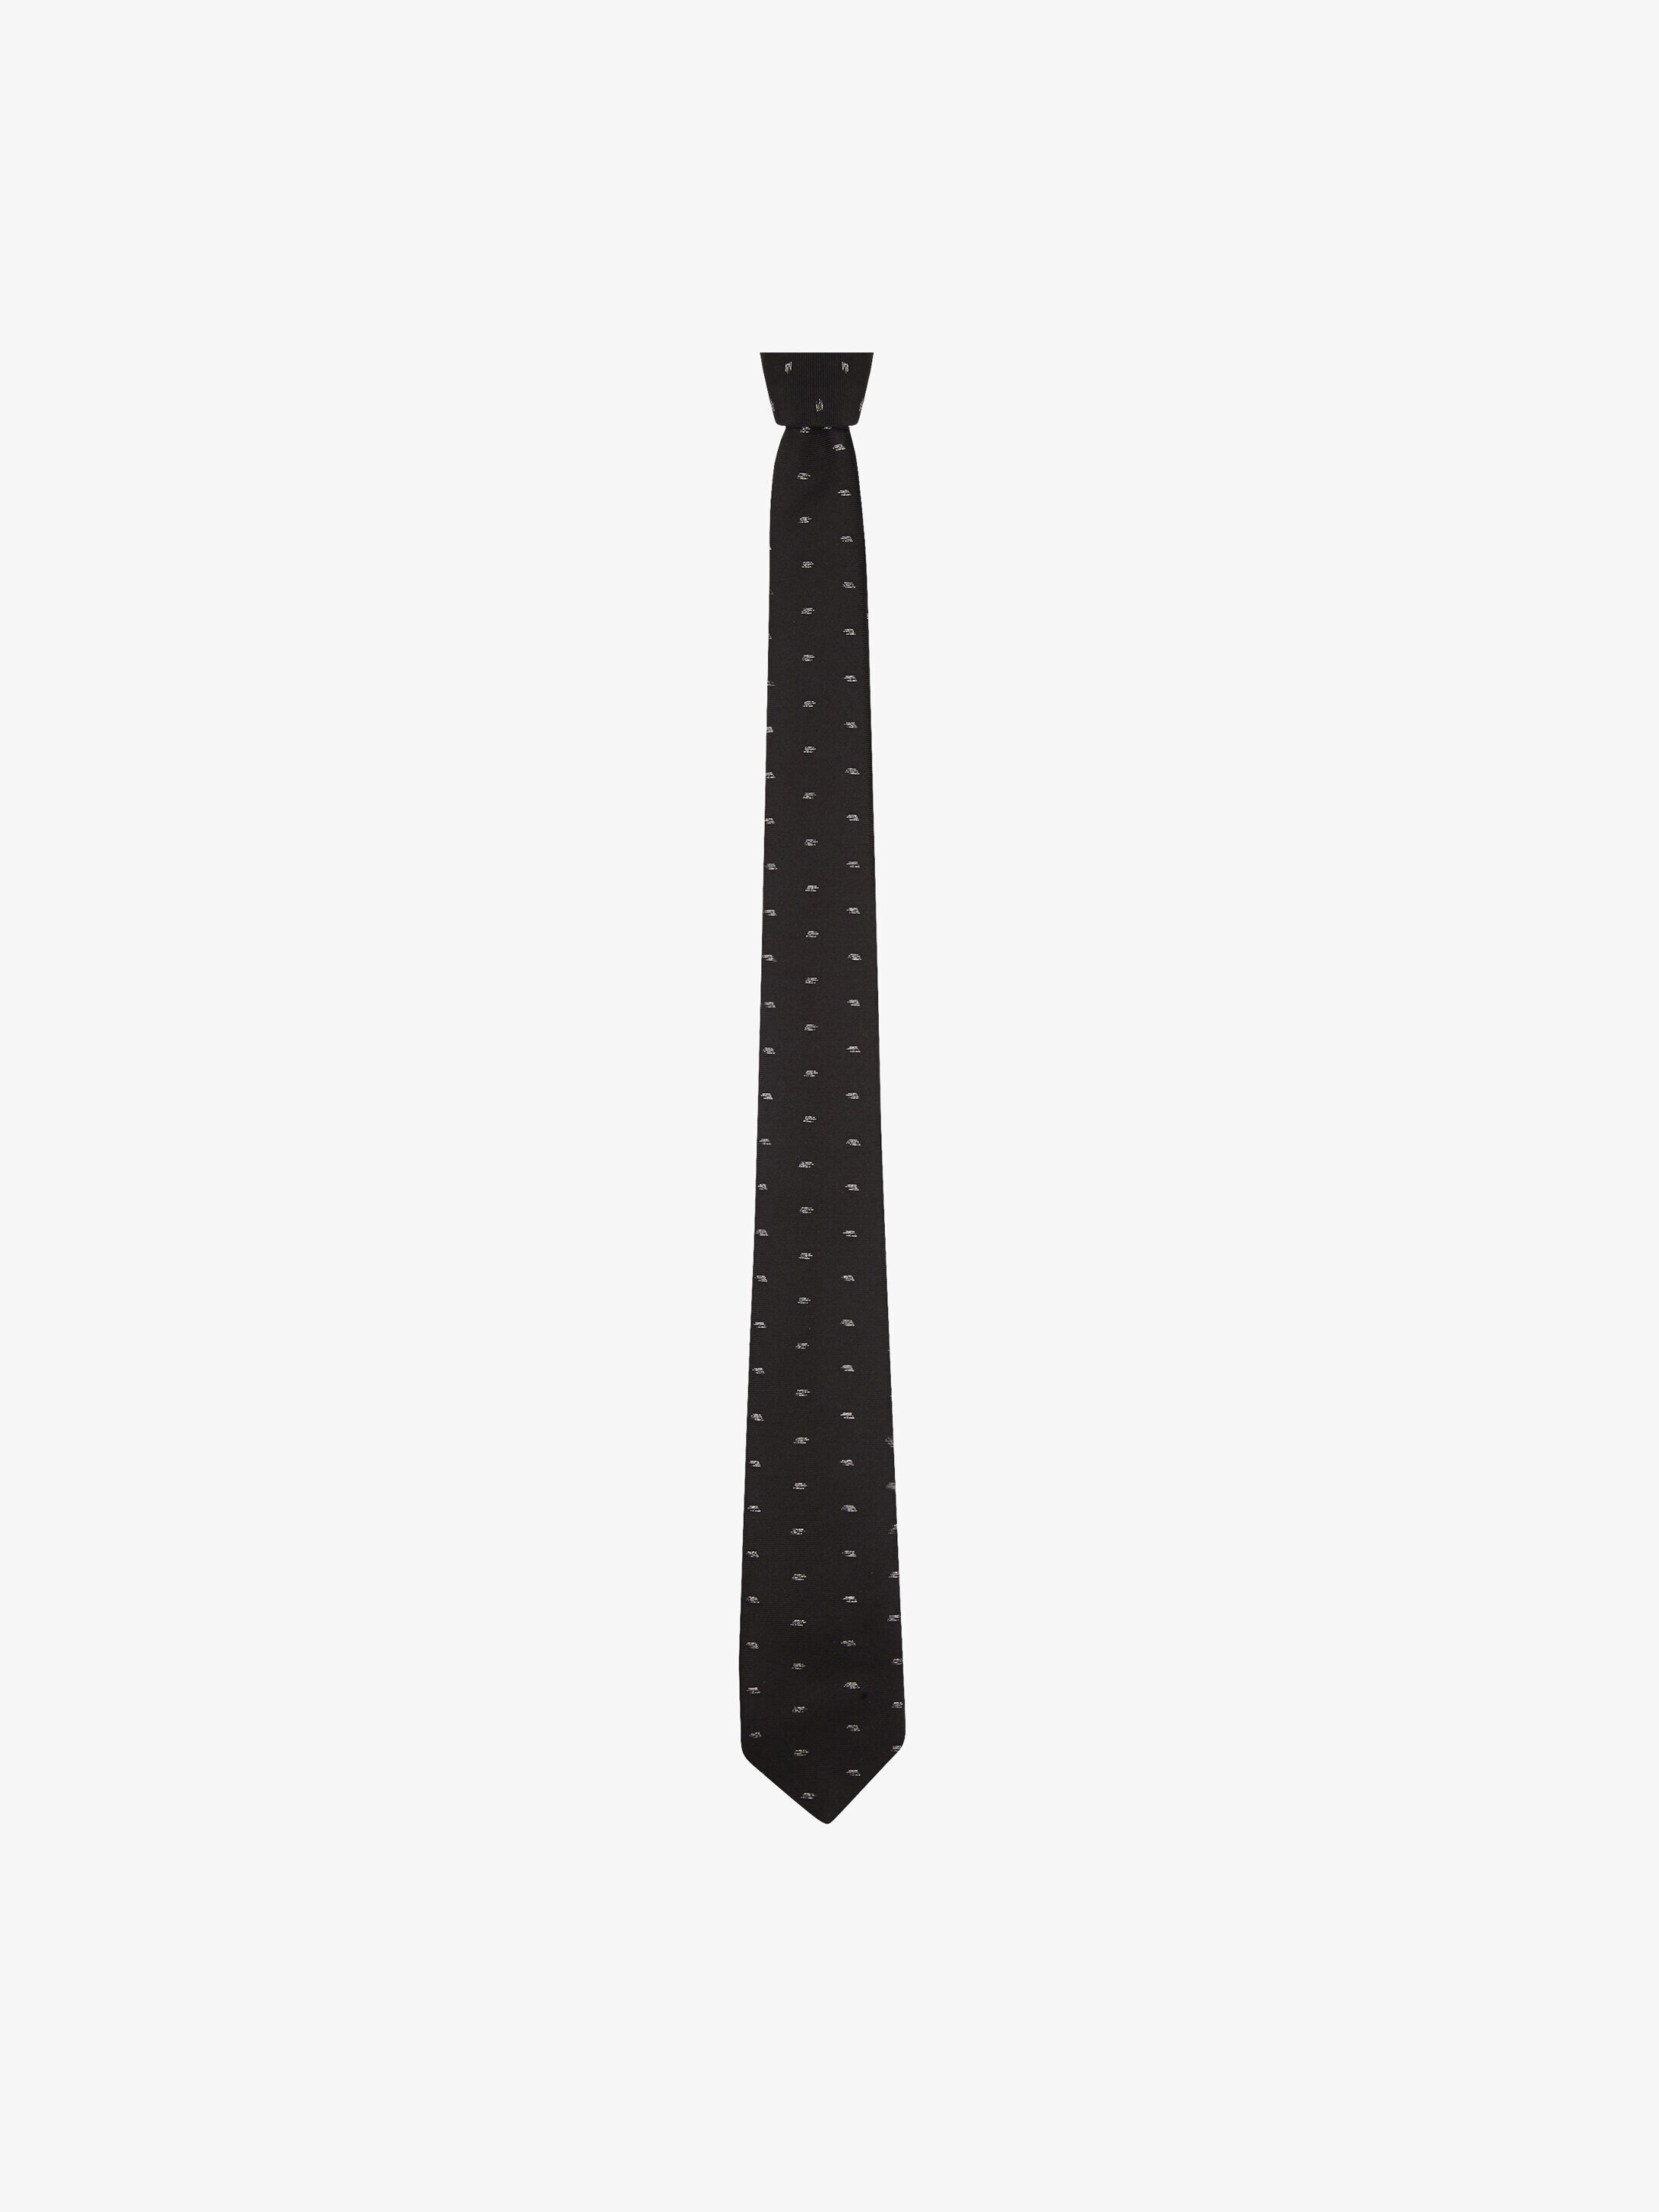 givenchy tie price